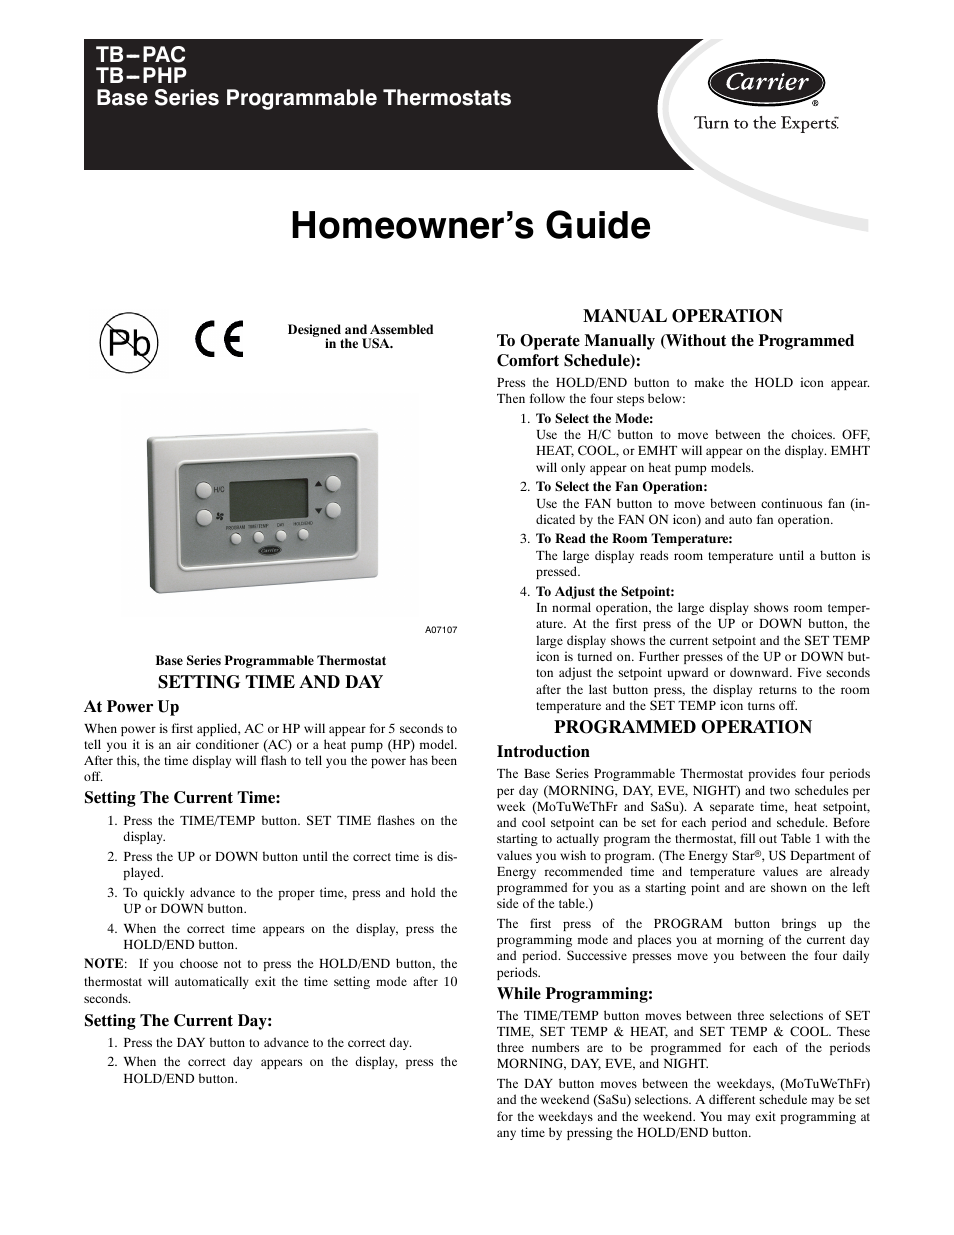 Homeowner's guide, Setting time and day, Manual operation | Carrier BASE  SERIES PROGRAMMABLE THERMOSTATS TB-PAC User Manual | Page 5 / 8